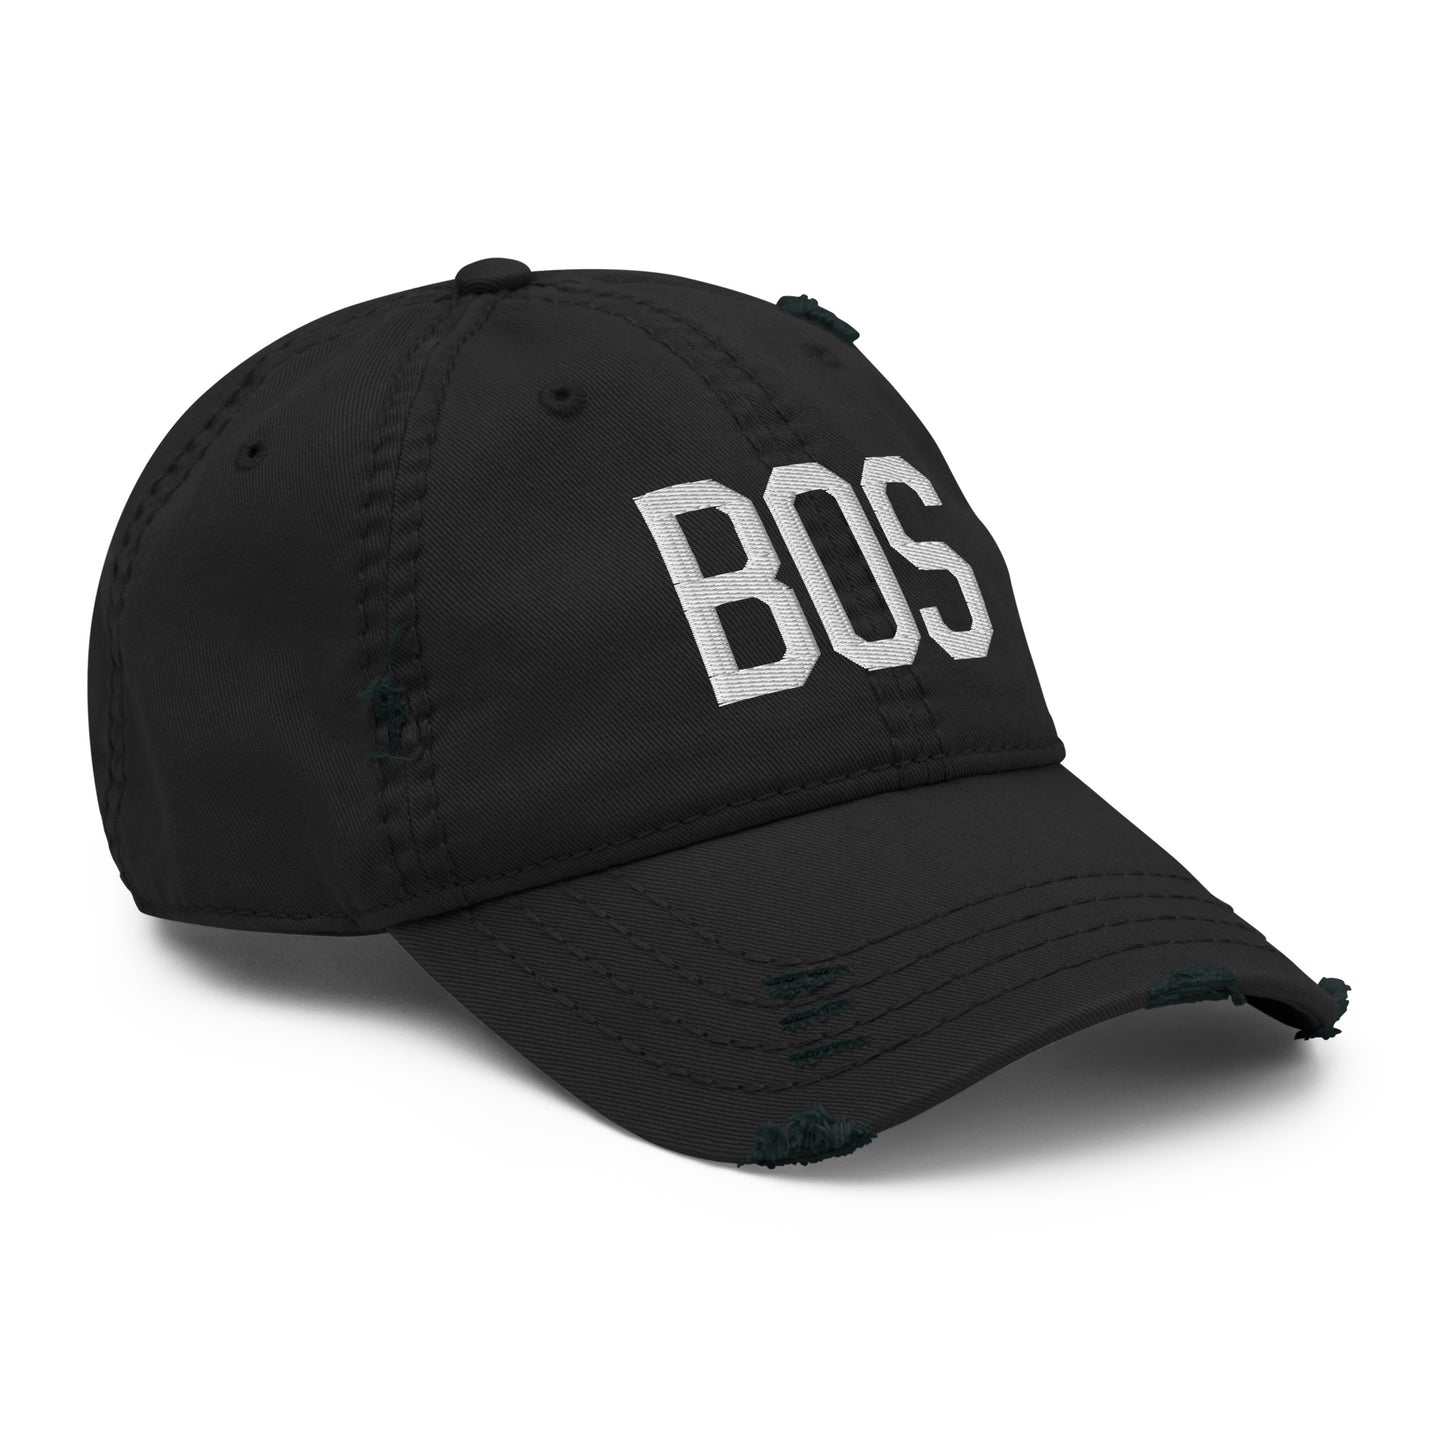 Airport Code Distressed Hat - White • BOS Boston • YHM Designs - Image 12